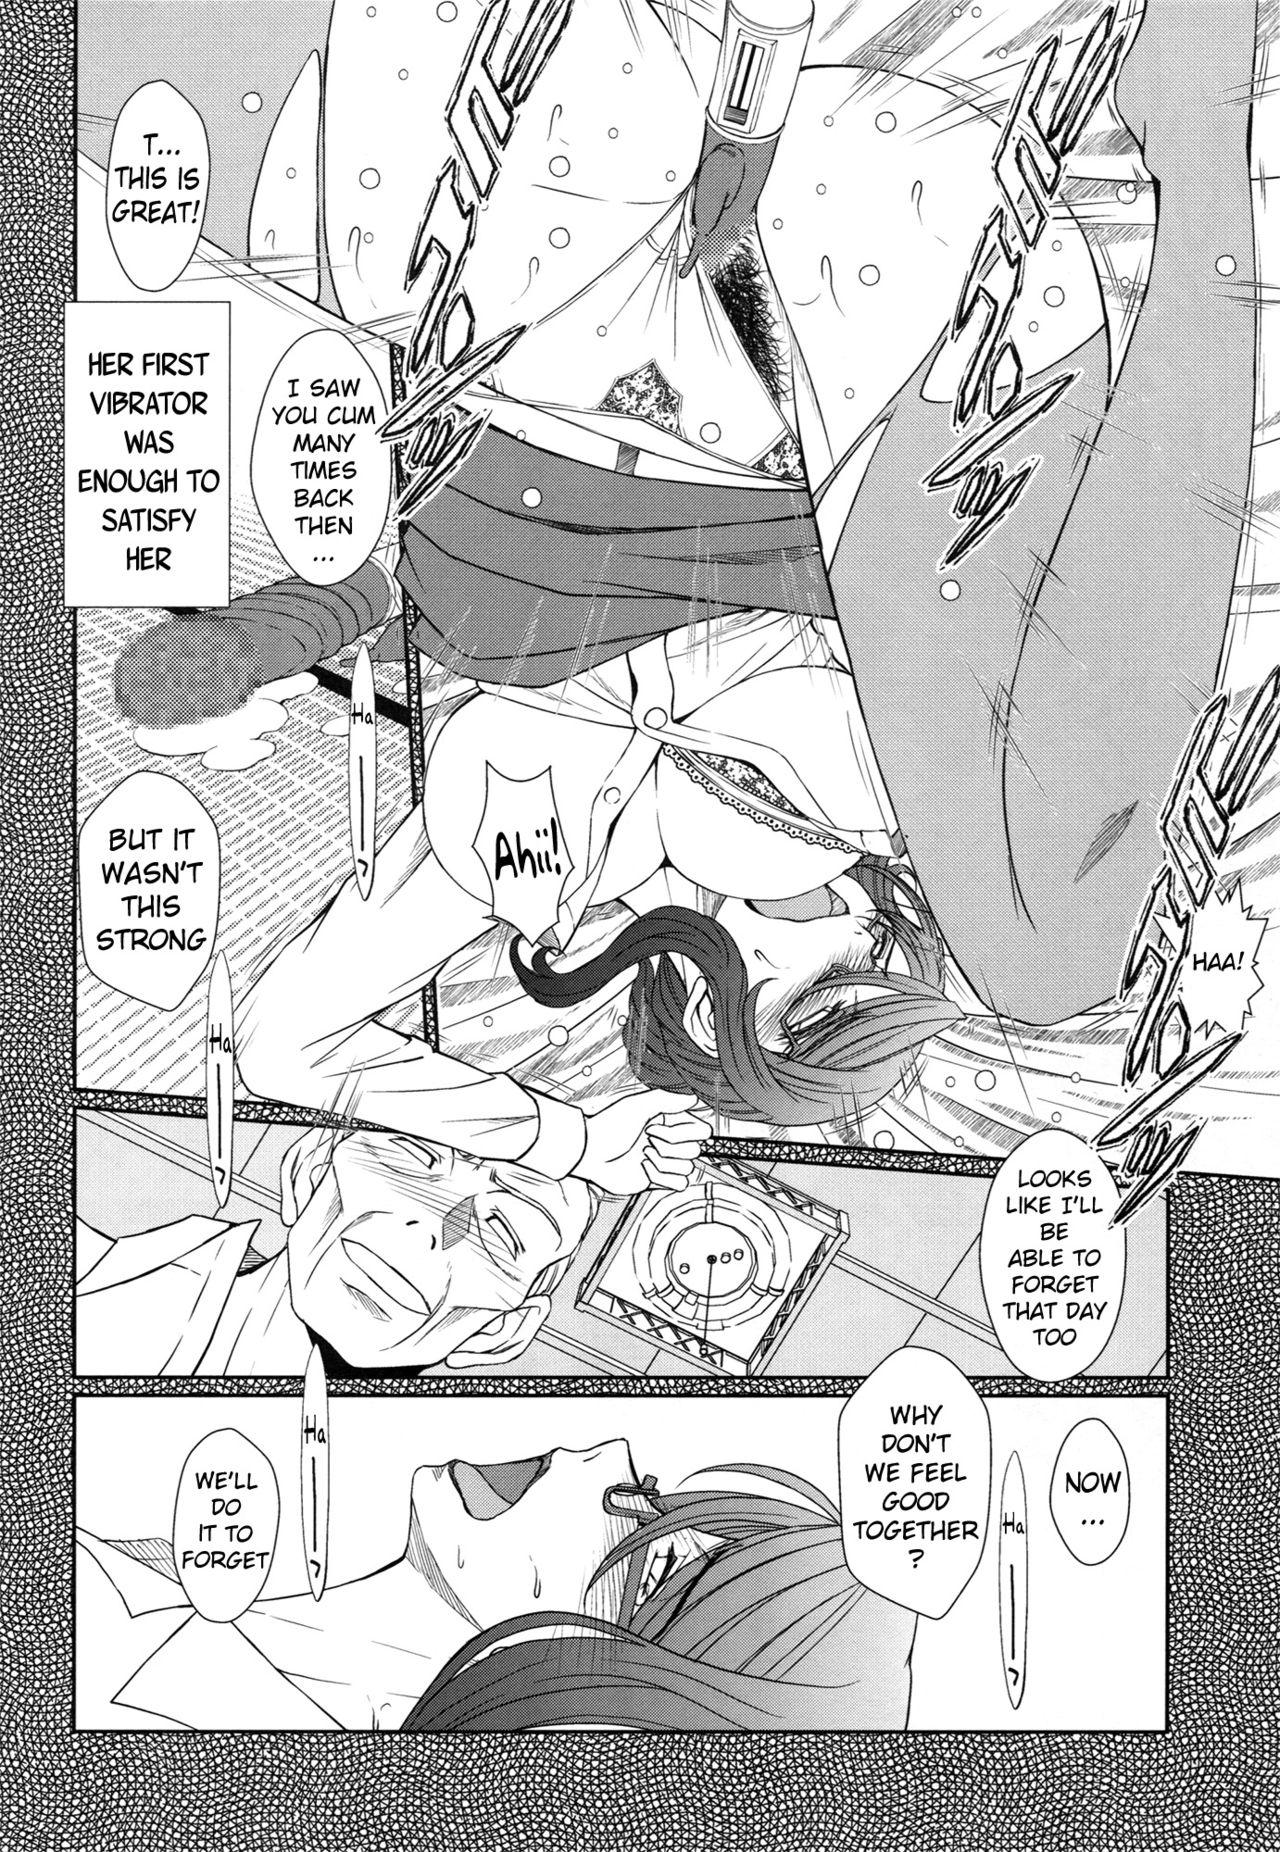 Master Zoku Akai Boushi no Onna - Woman with a red cap - Kyuujou lovers Submission - Page 9